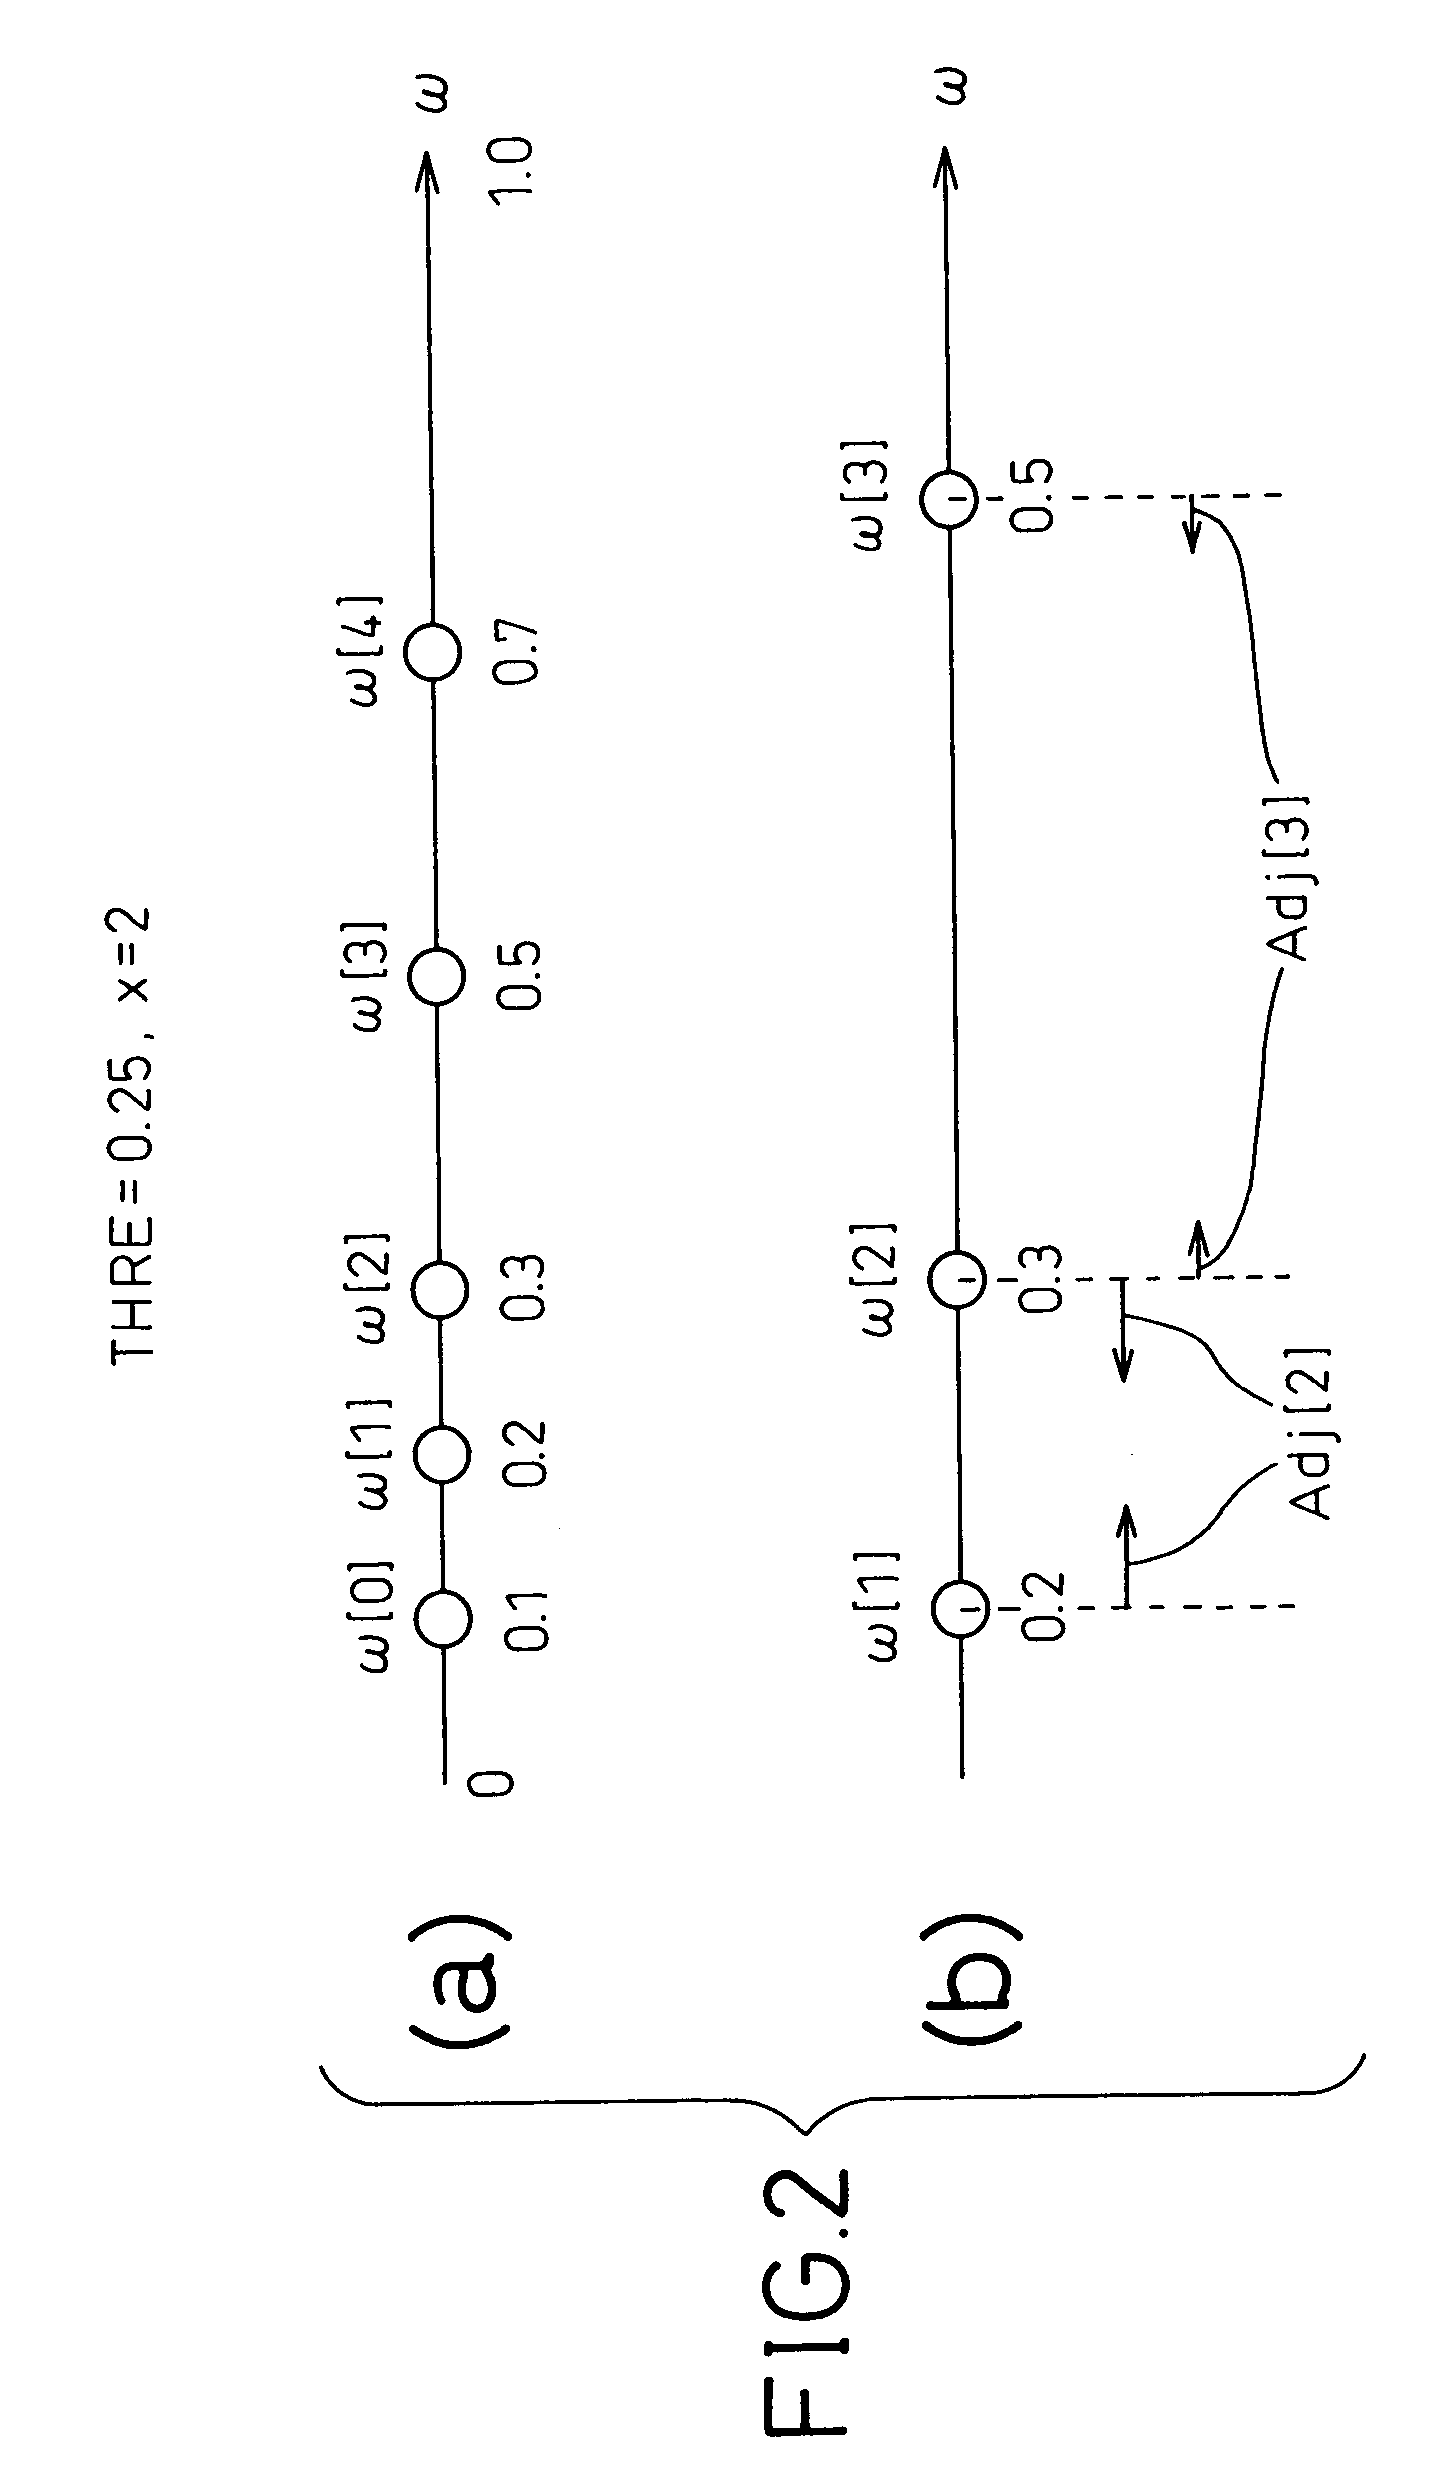 Speech processing apparatus and mobile communication terminal